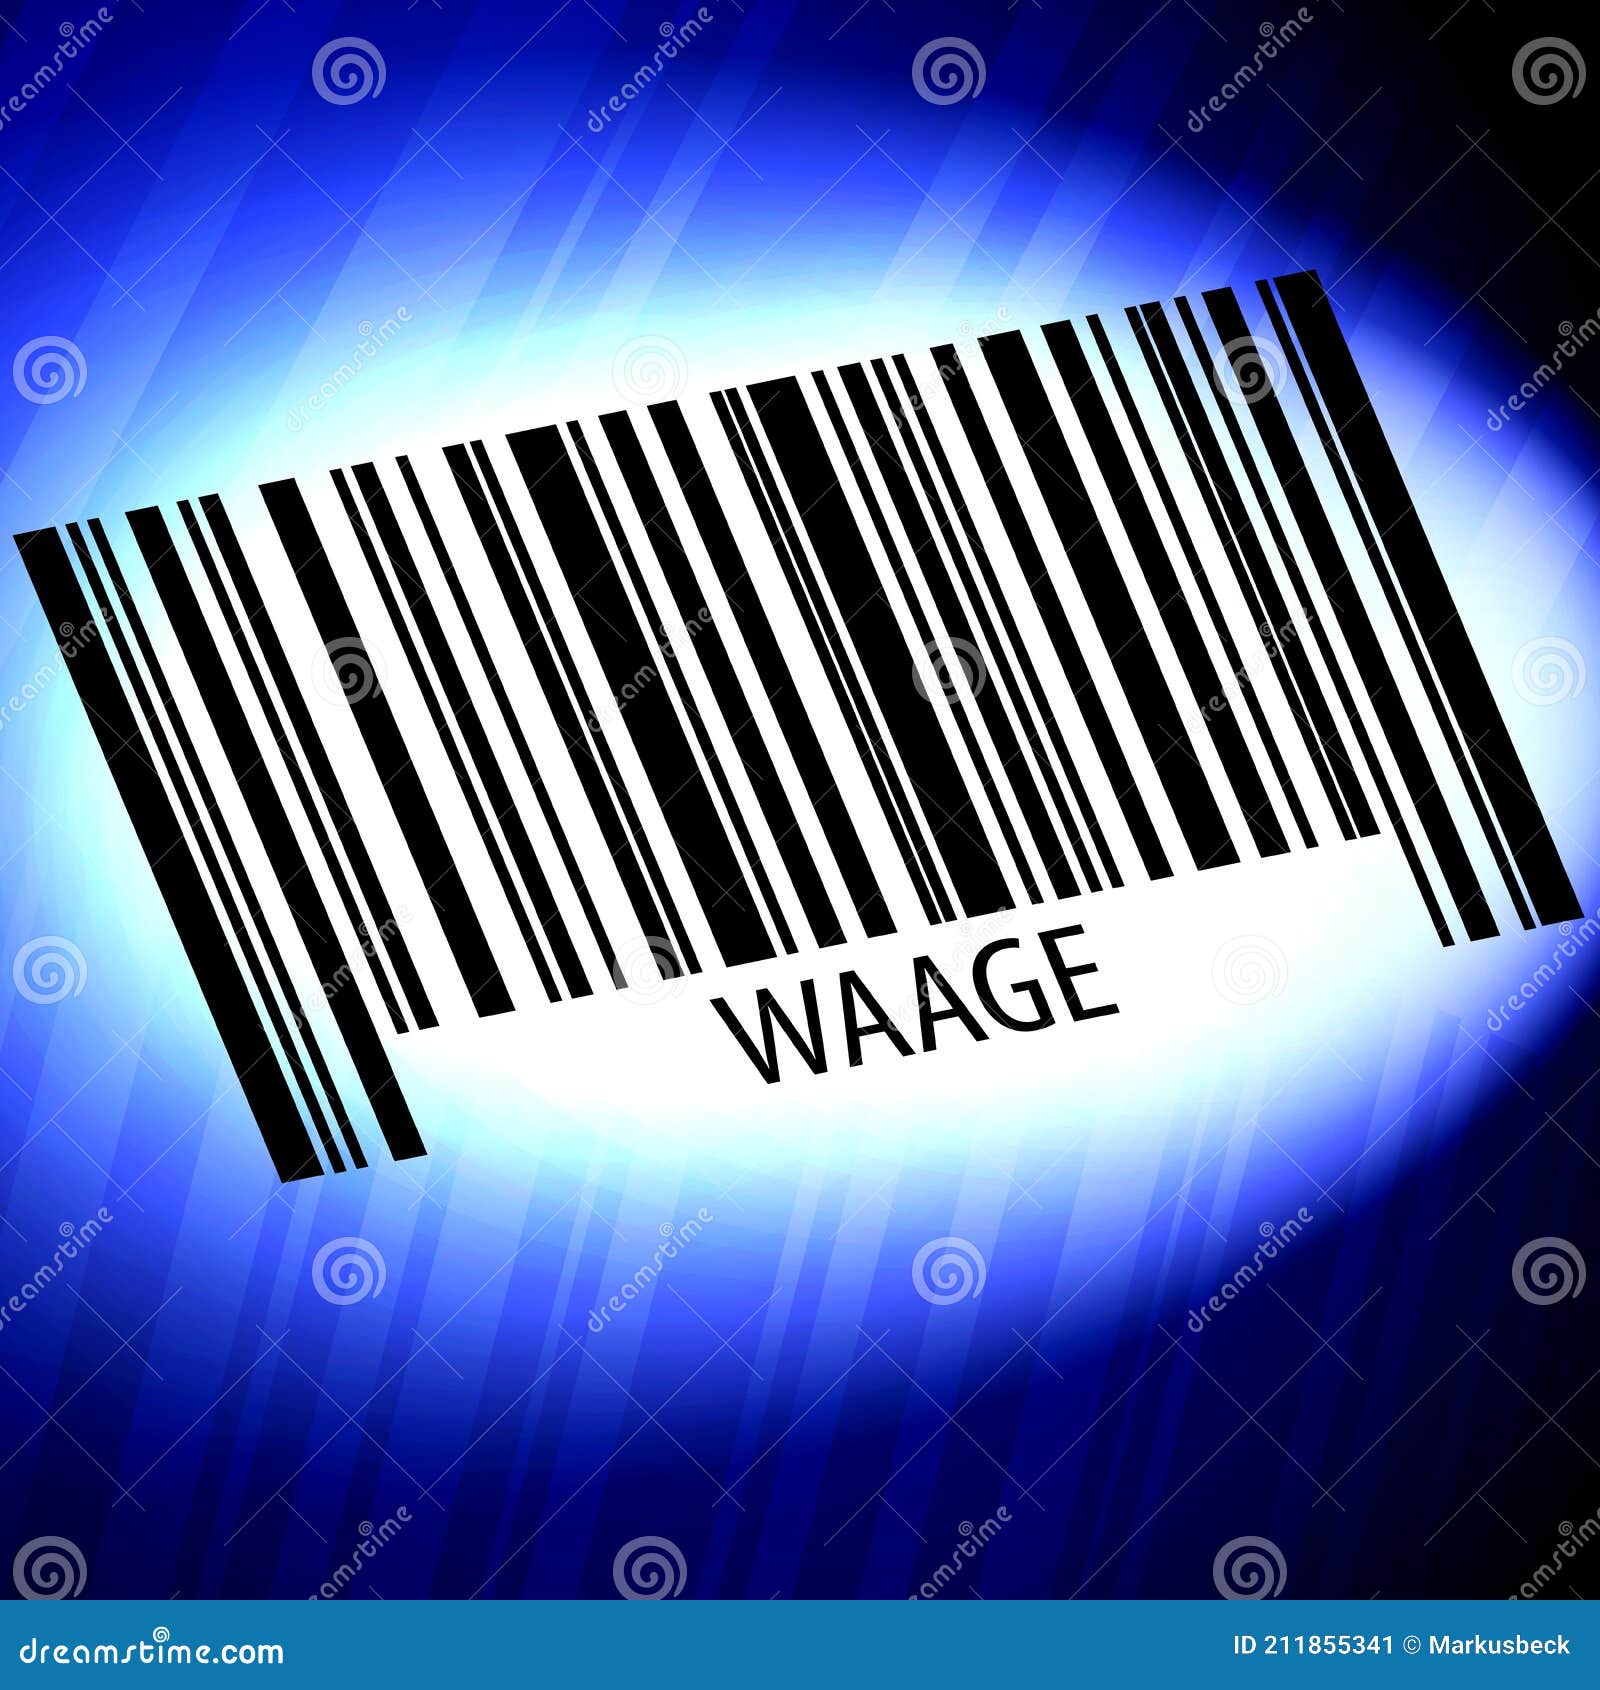 waage - barcode with futuristic blue background